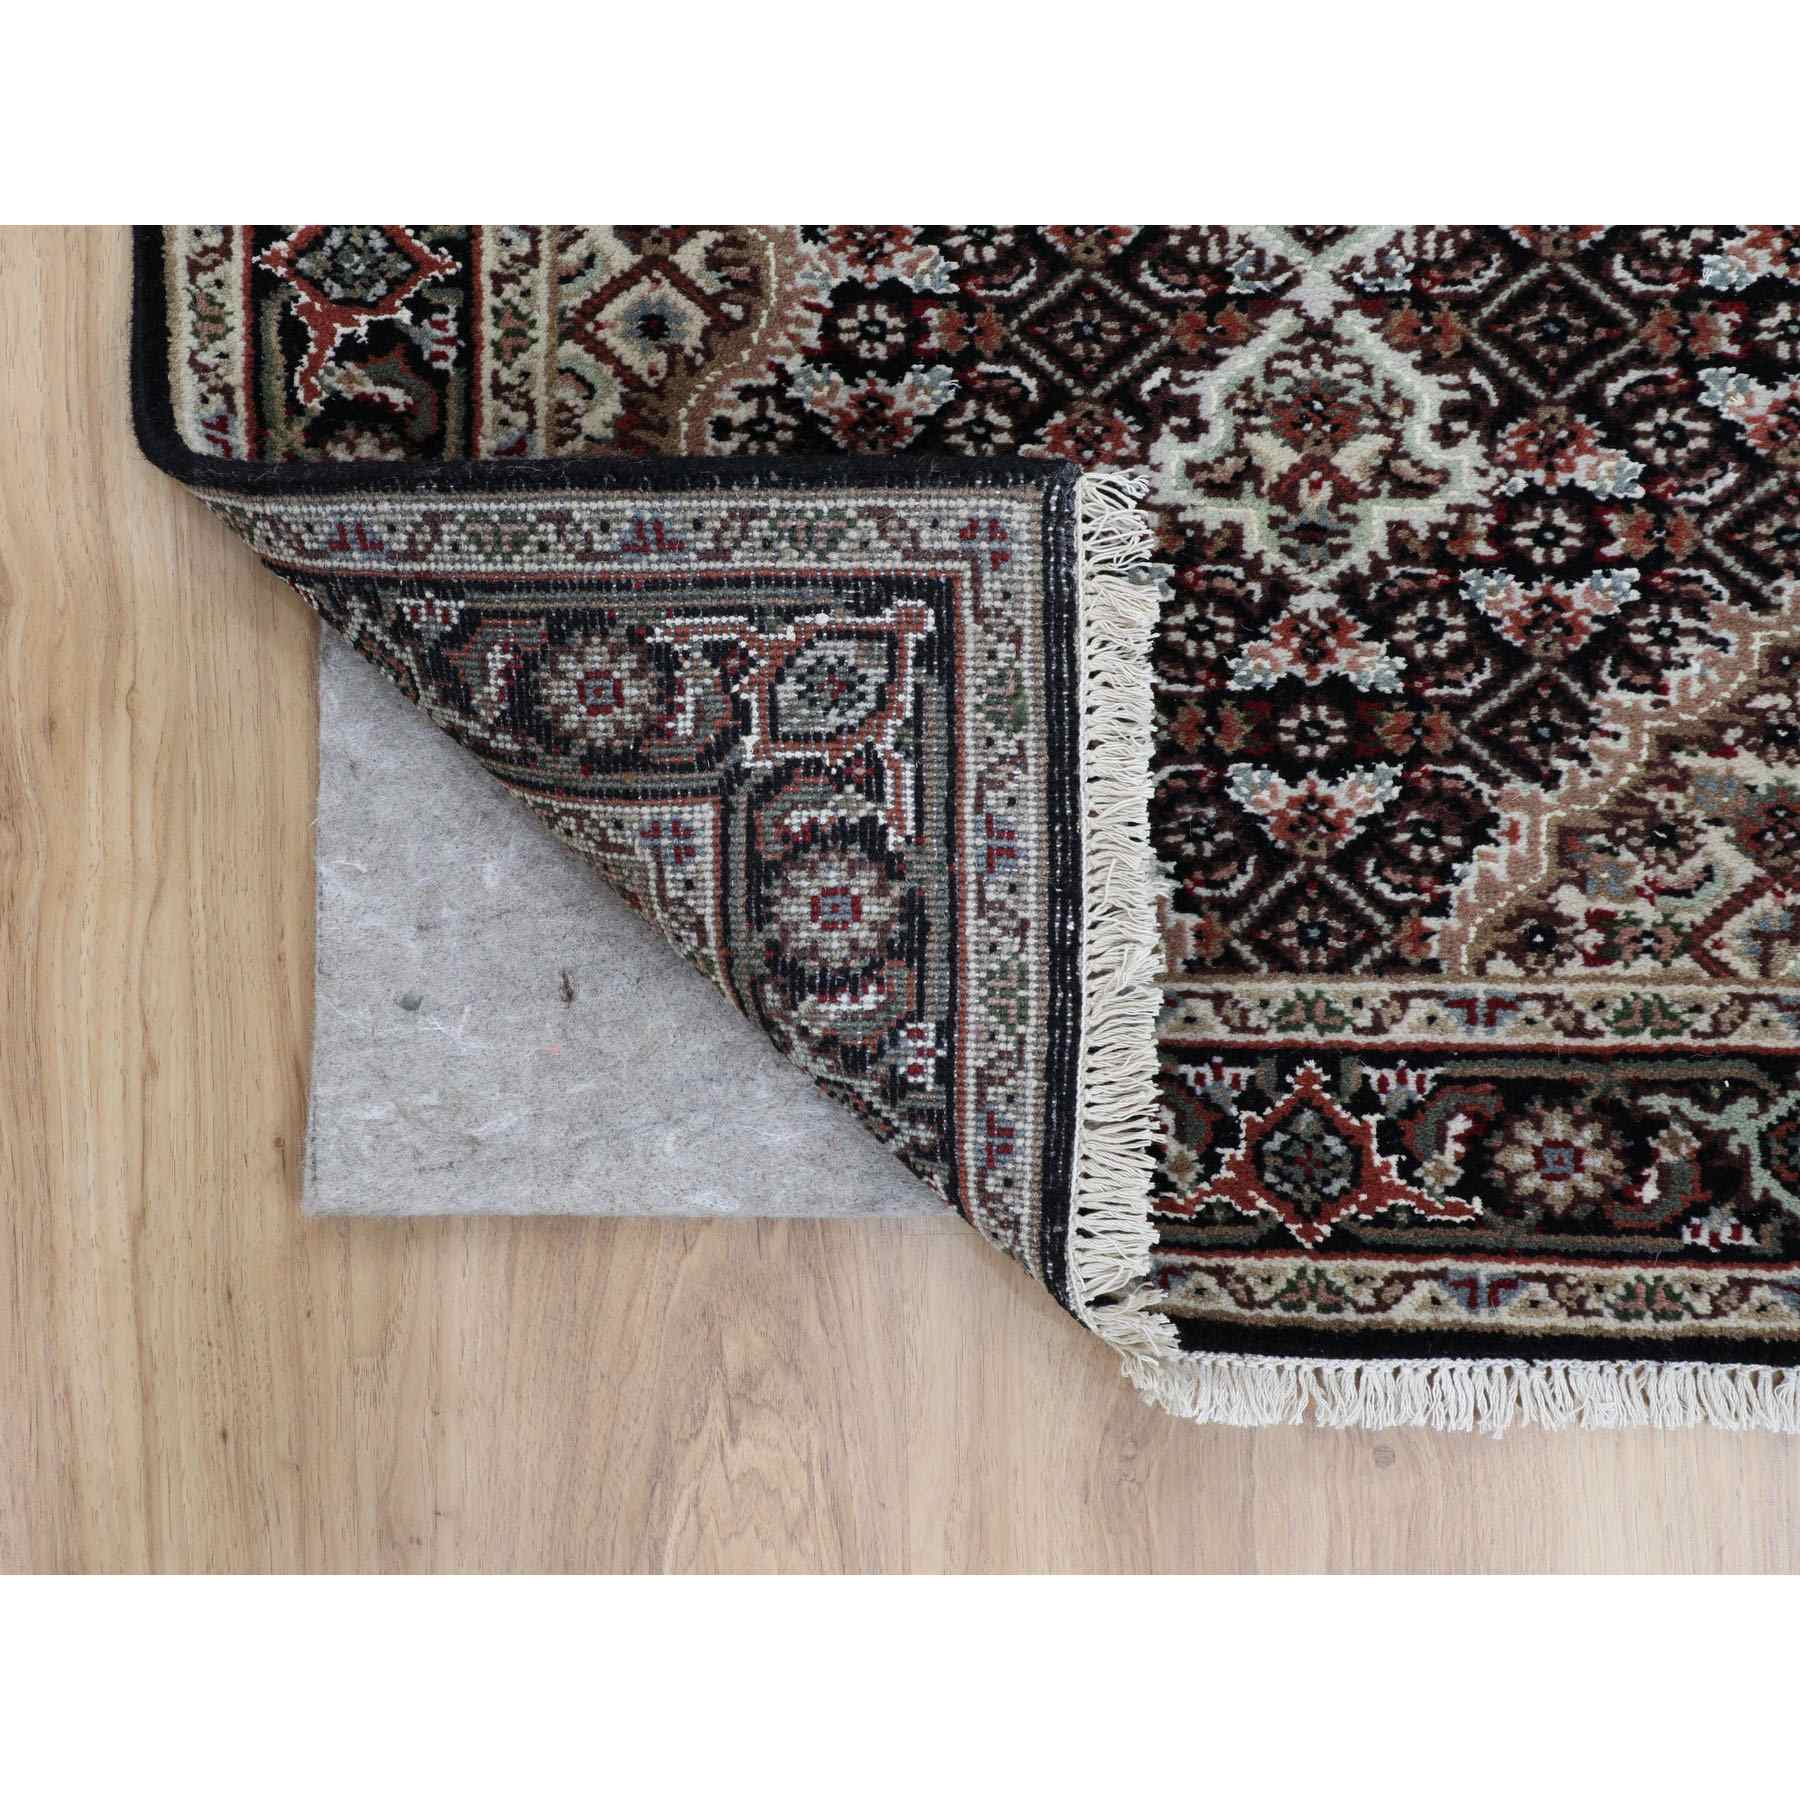 Fine-Oriental-Hand-Knotted-Rug-291545